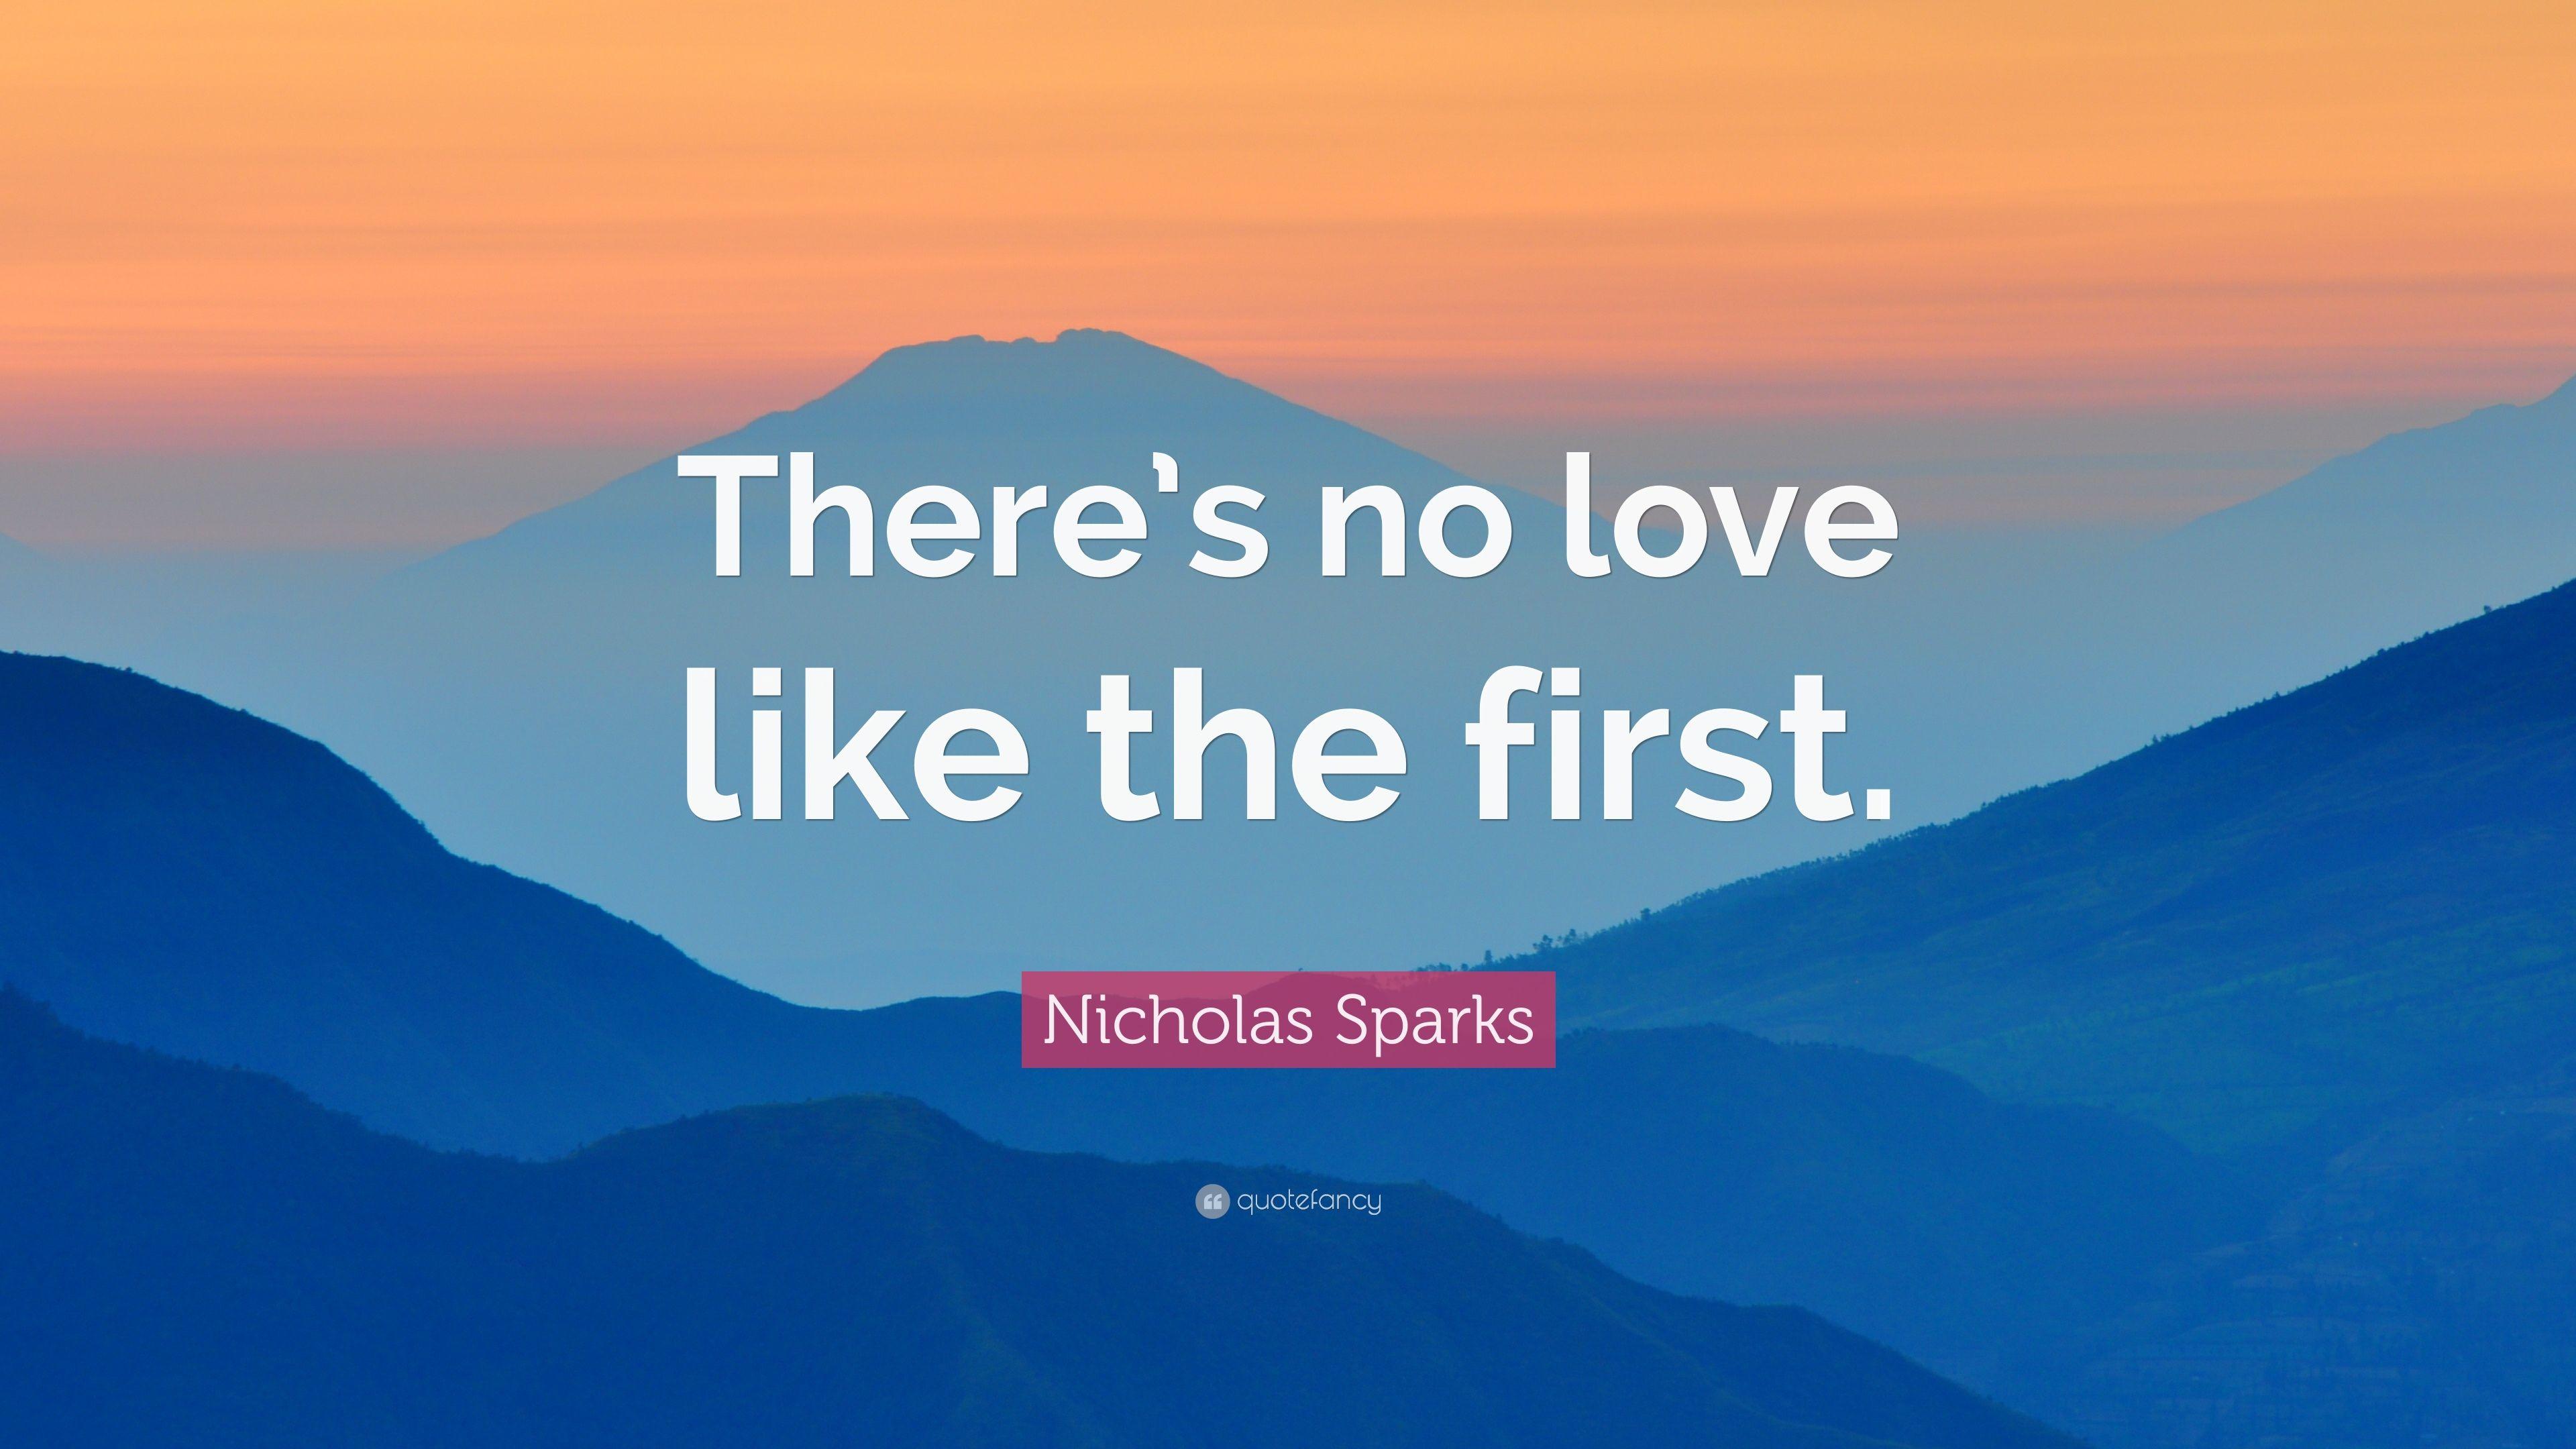 Nicholas Sparks Quote: “There's no love like the first.” 12